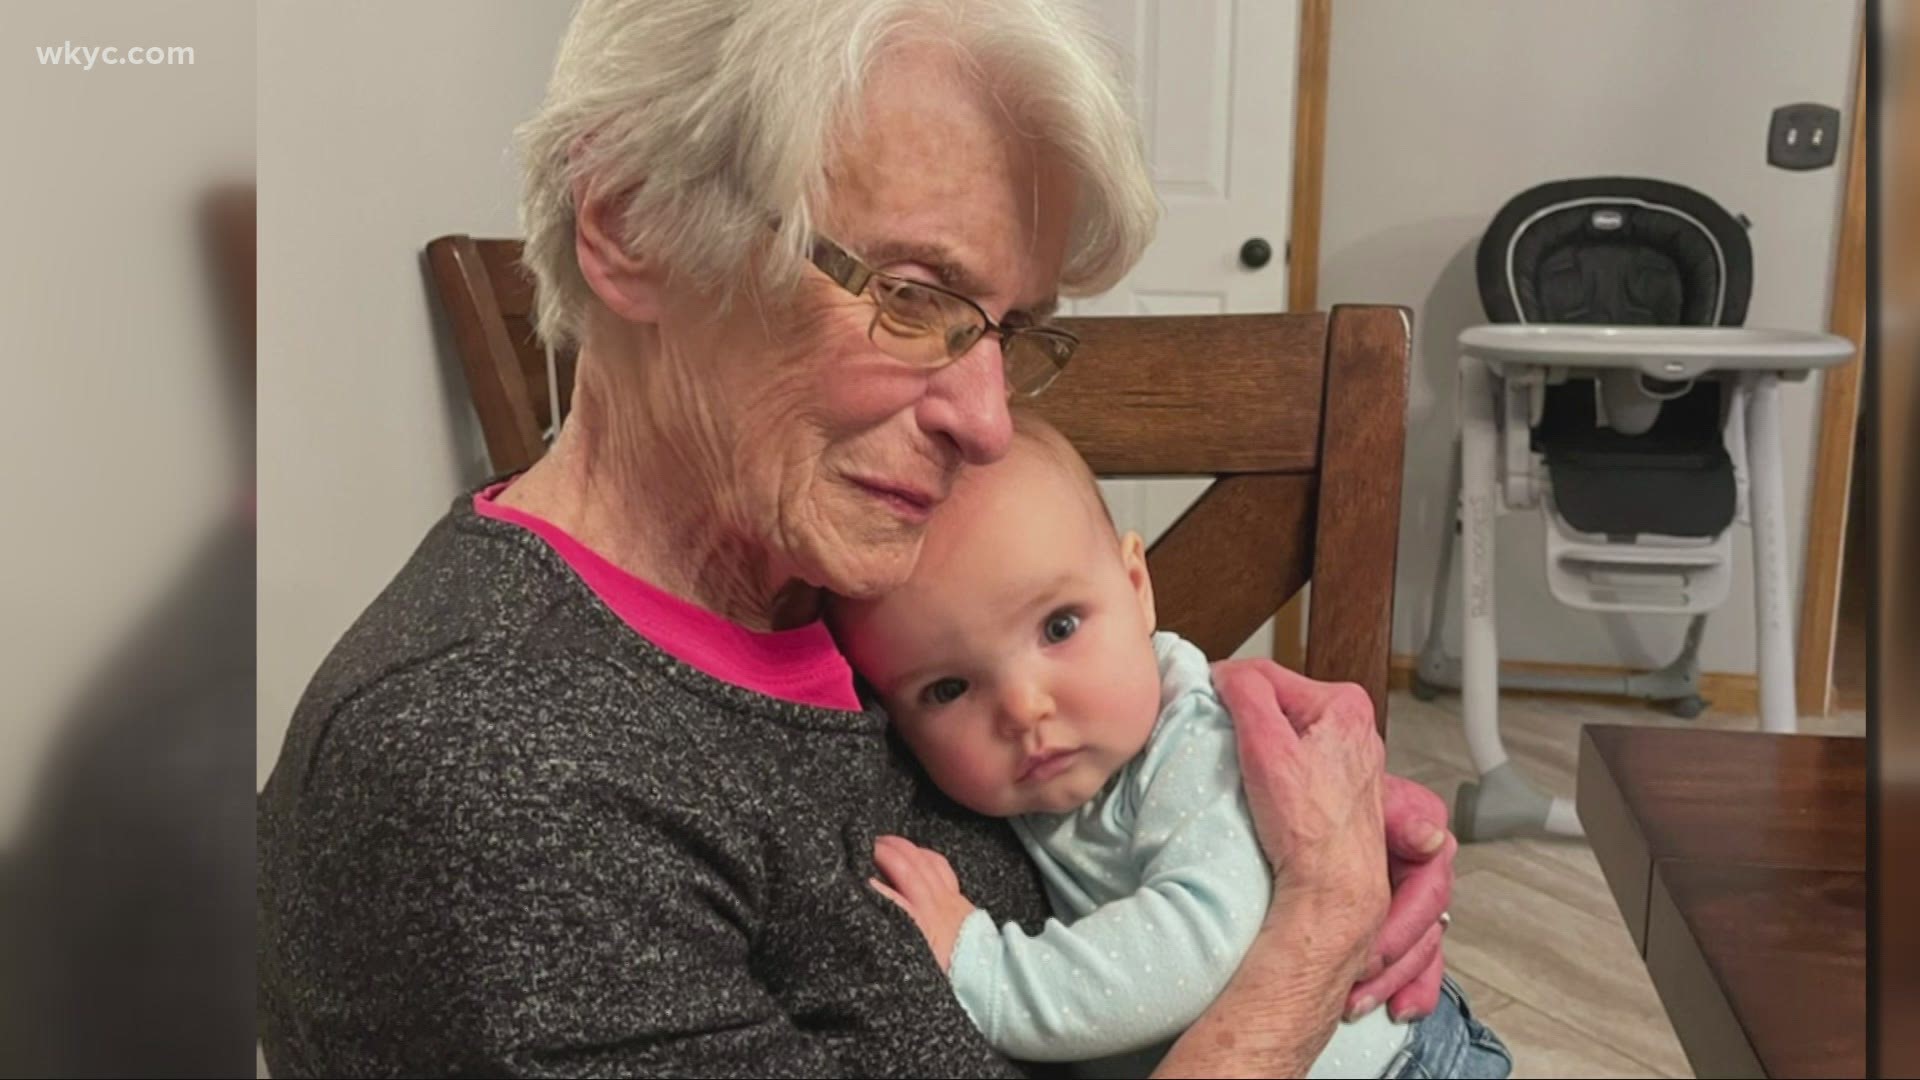 What a special moment! After being vaccinated, 82-year-old Janet Rathbone from Aurora was finally able to safely meet her 9-month-old great grandchild.